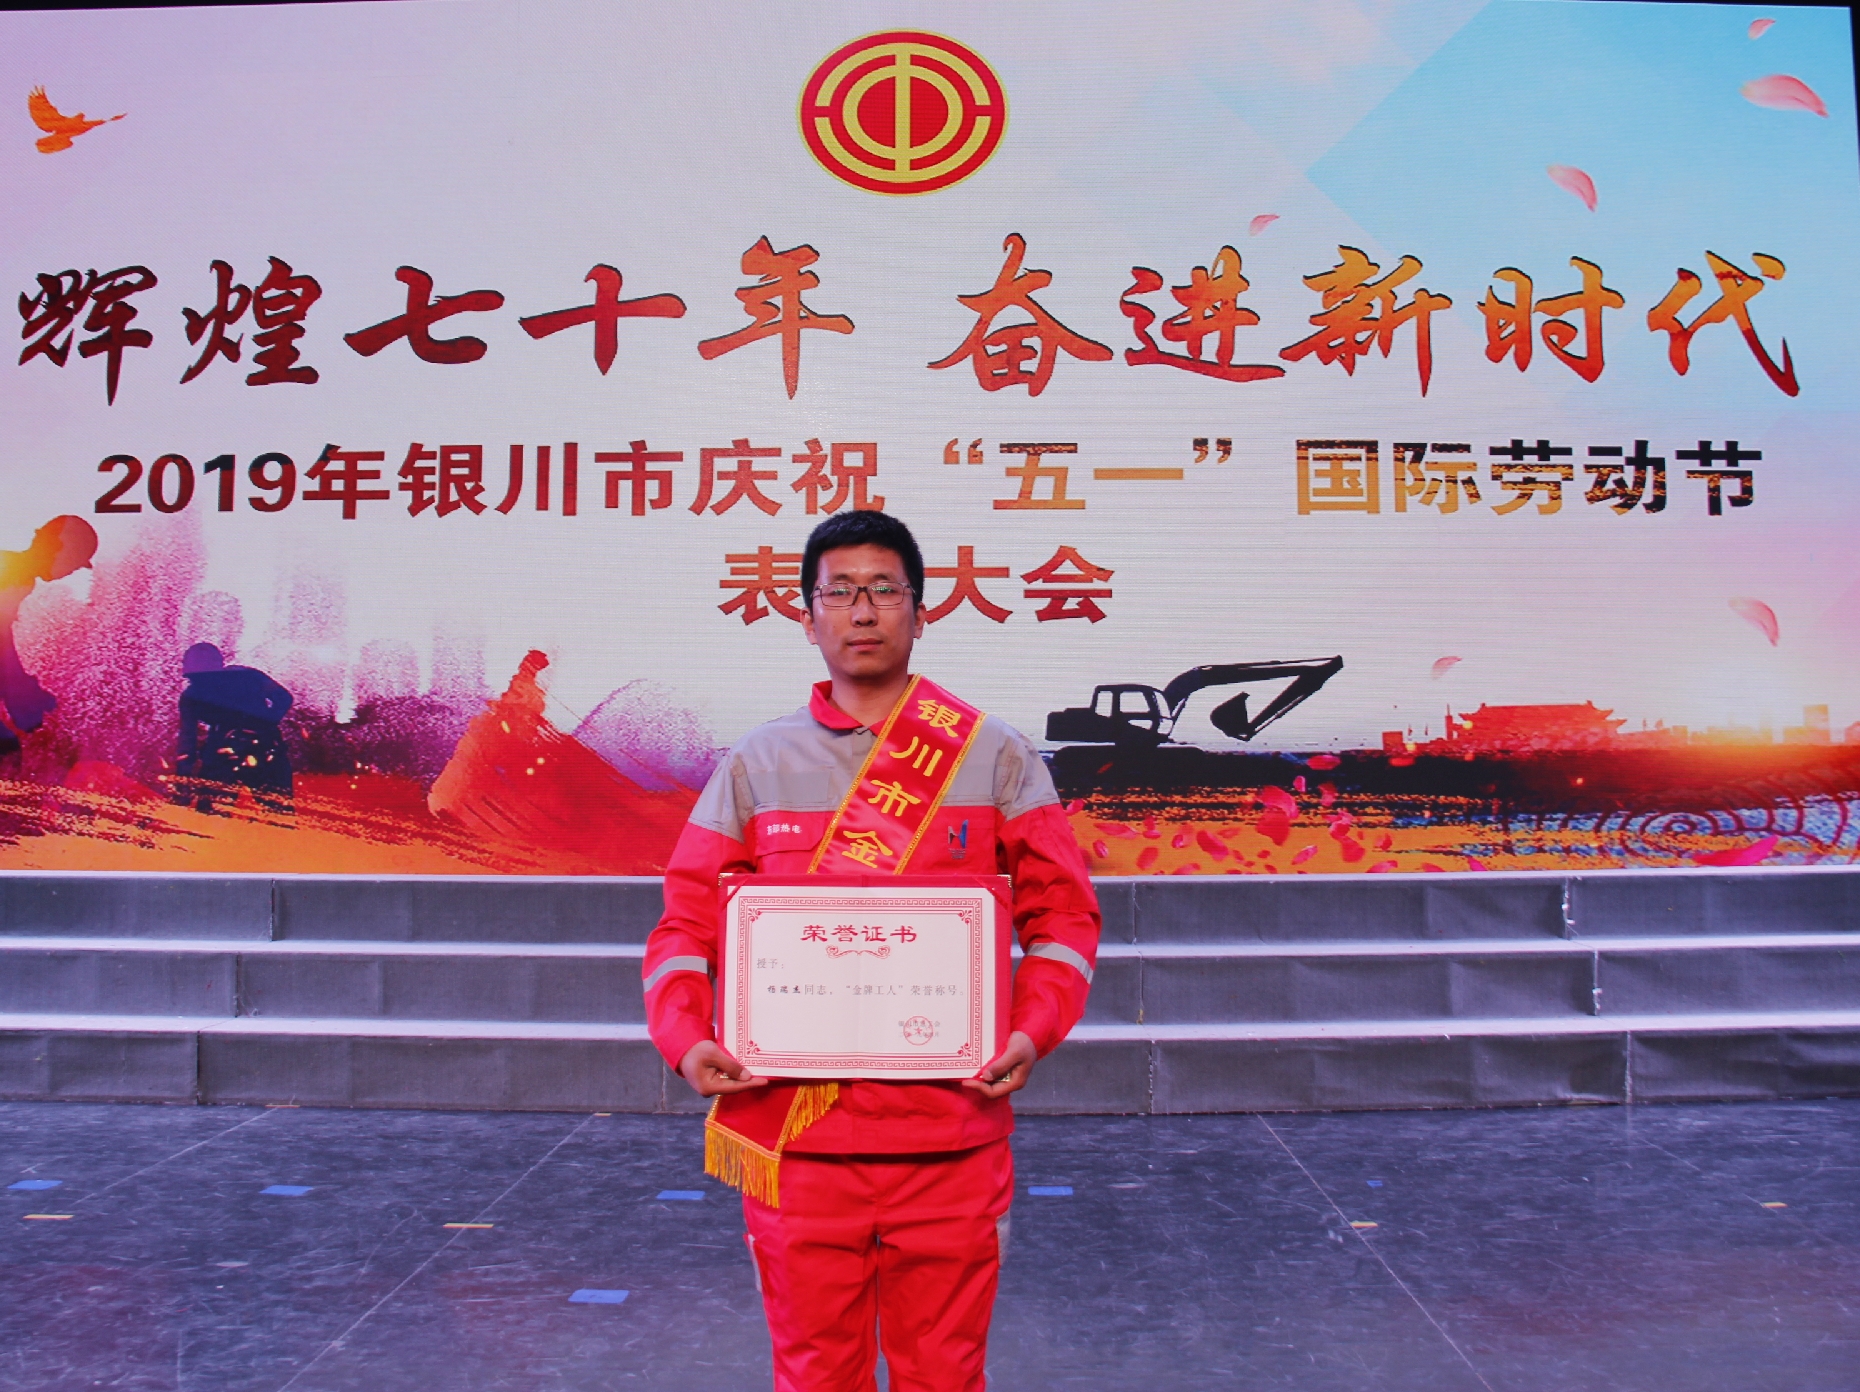 Glory of Labors in May (2) — Yang Ruijie from East Thermal Plant Maintenance Department has won the “Gold Medal Worker” in Yinchuan City